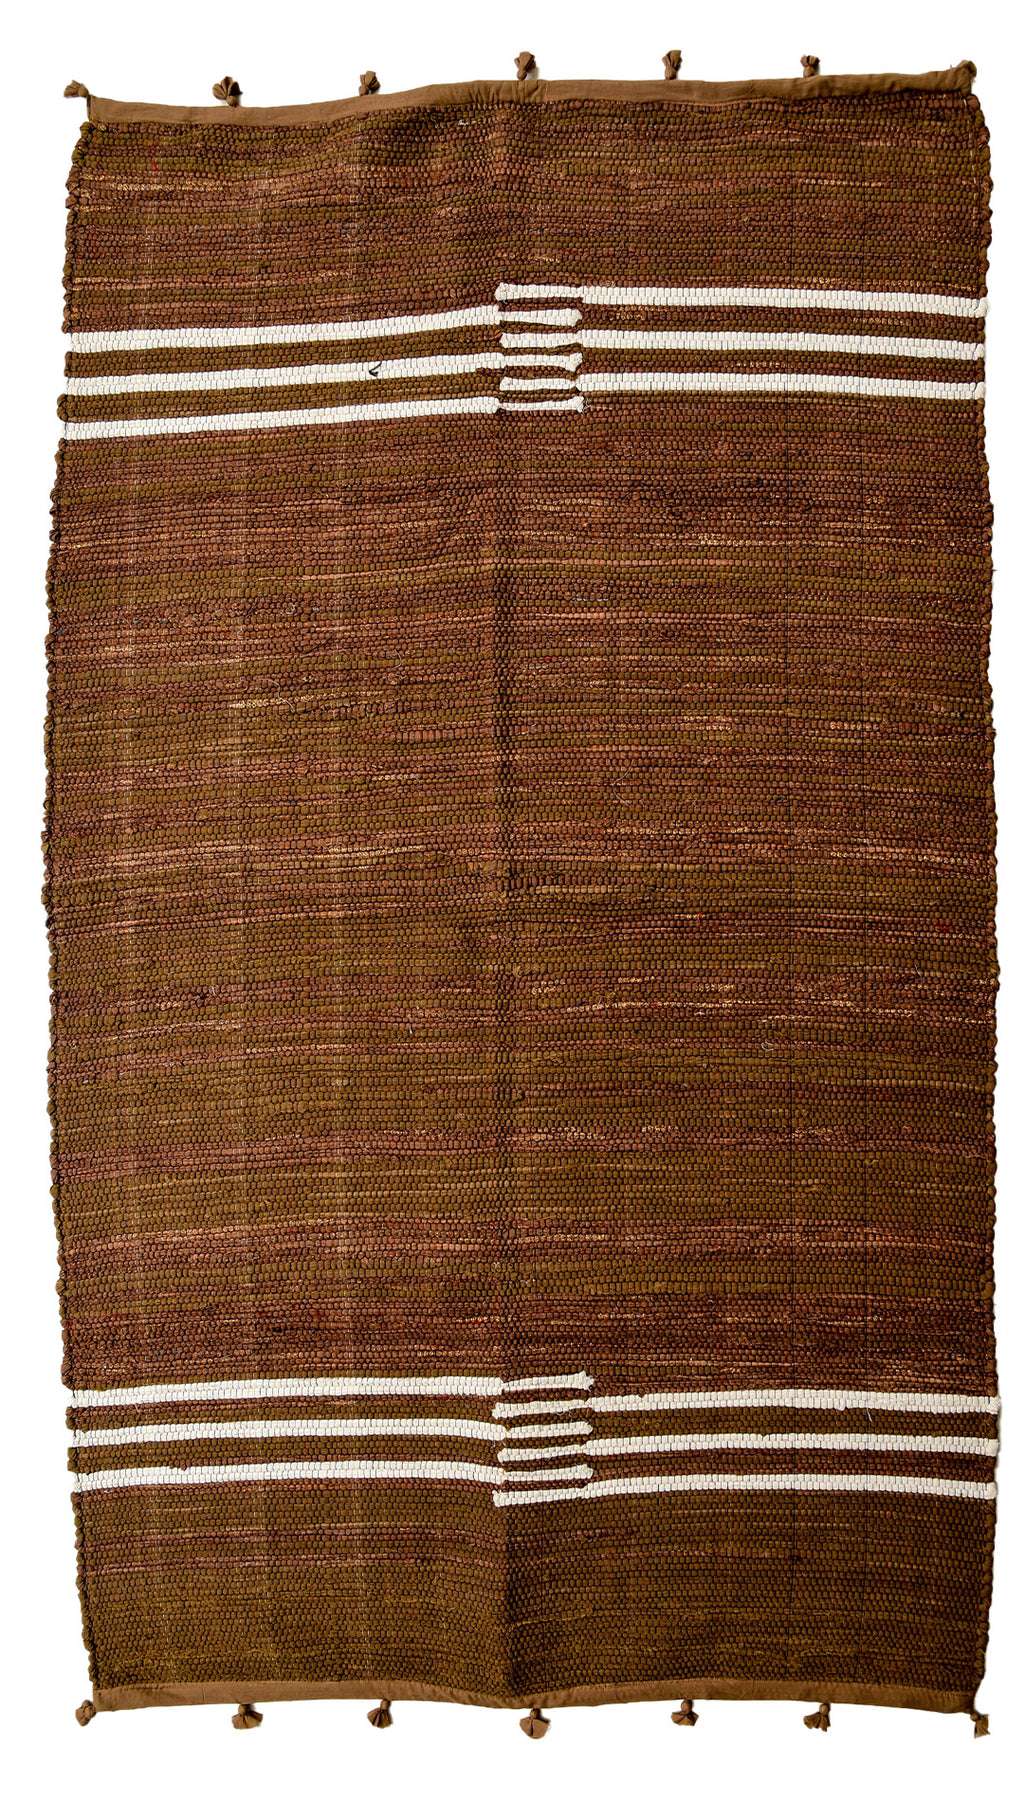 Brown Rug from textile leftovers - Aavaran Udaipur